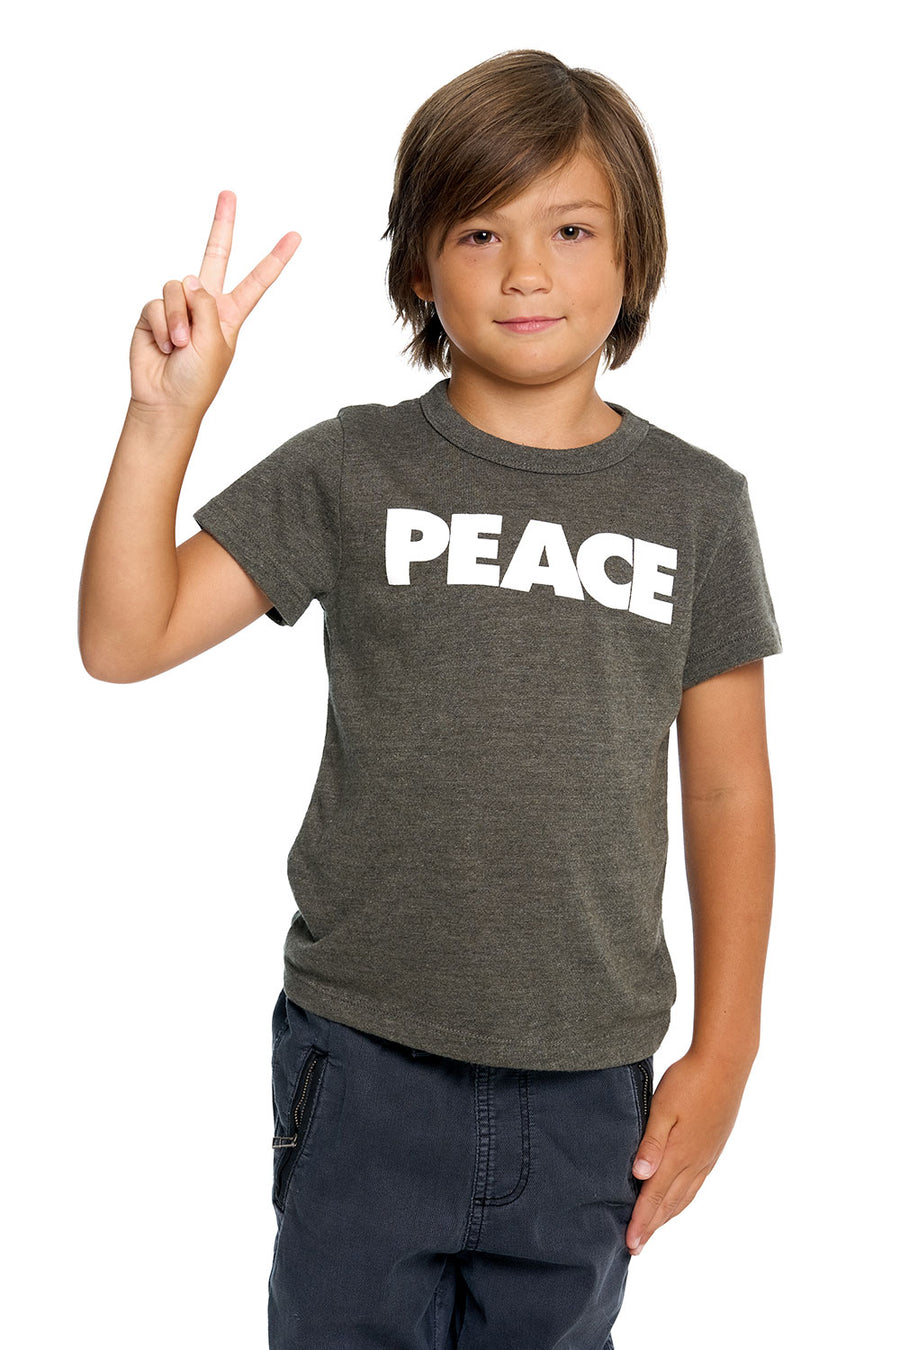 Peace BOYS chaserbrand